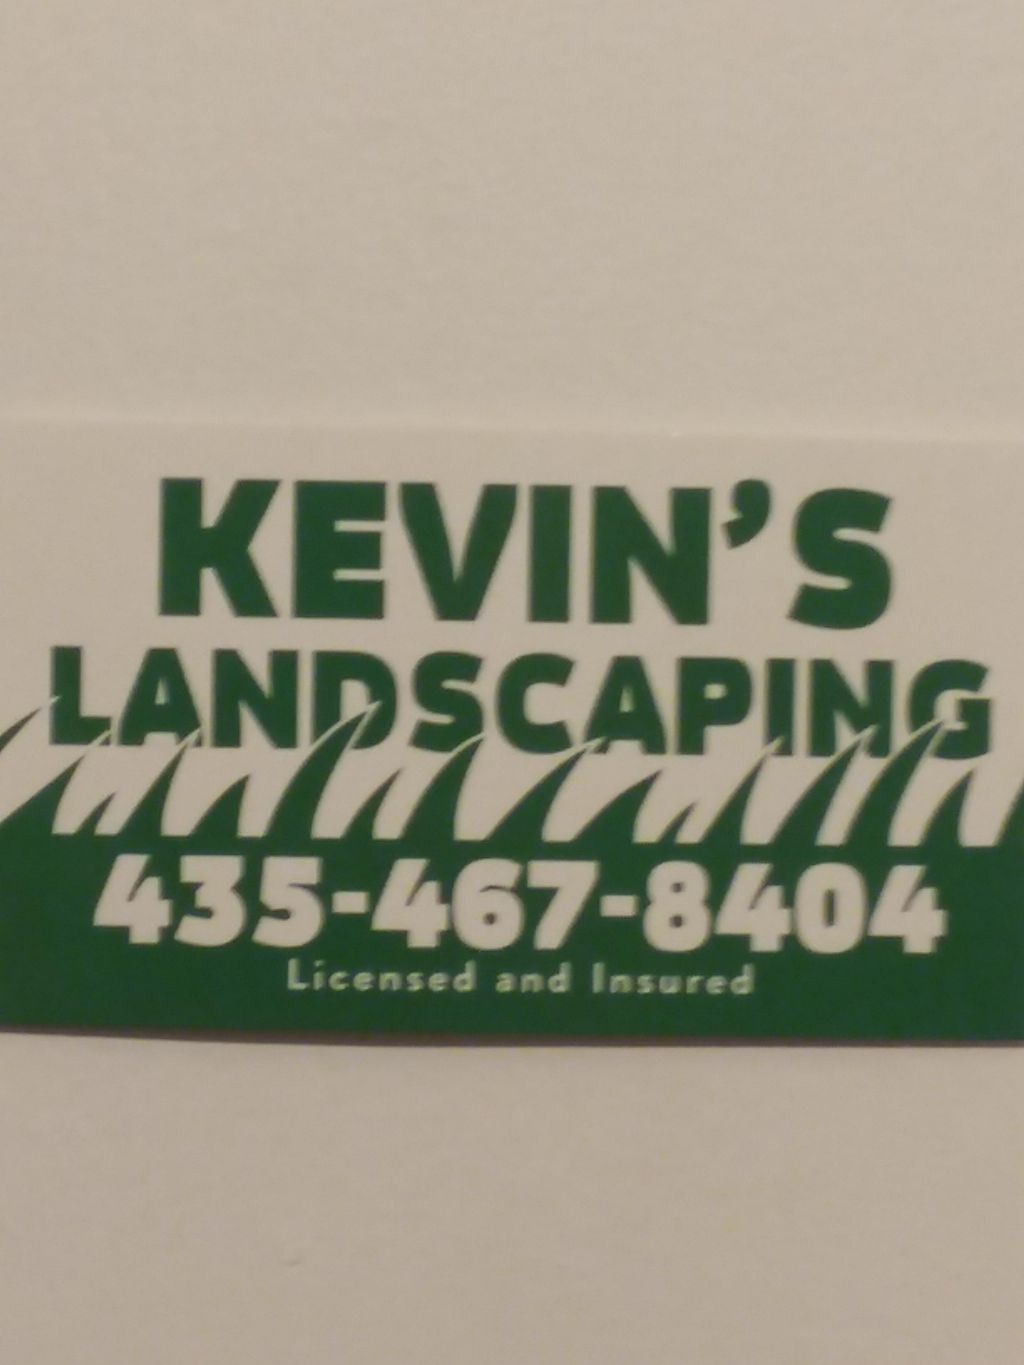 Kevin's landscaping